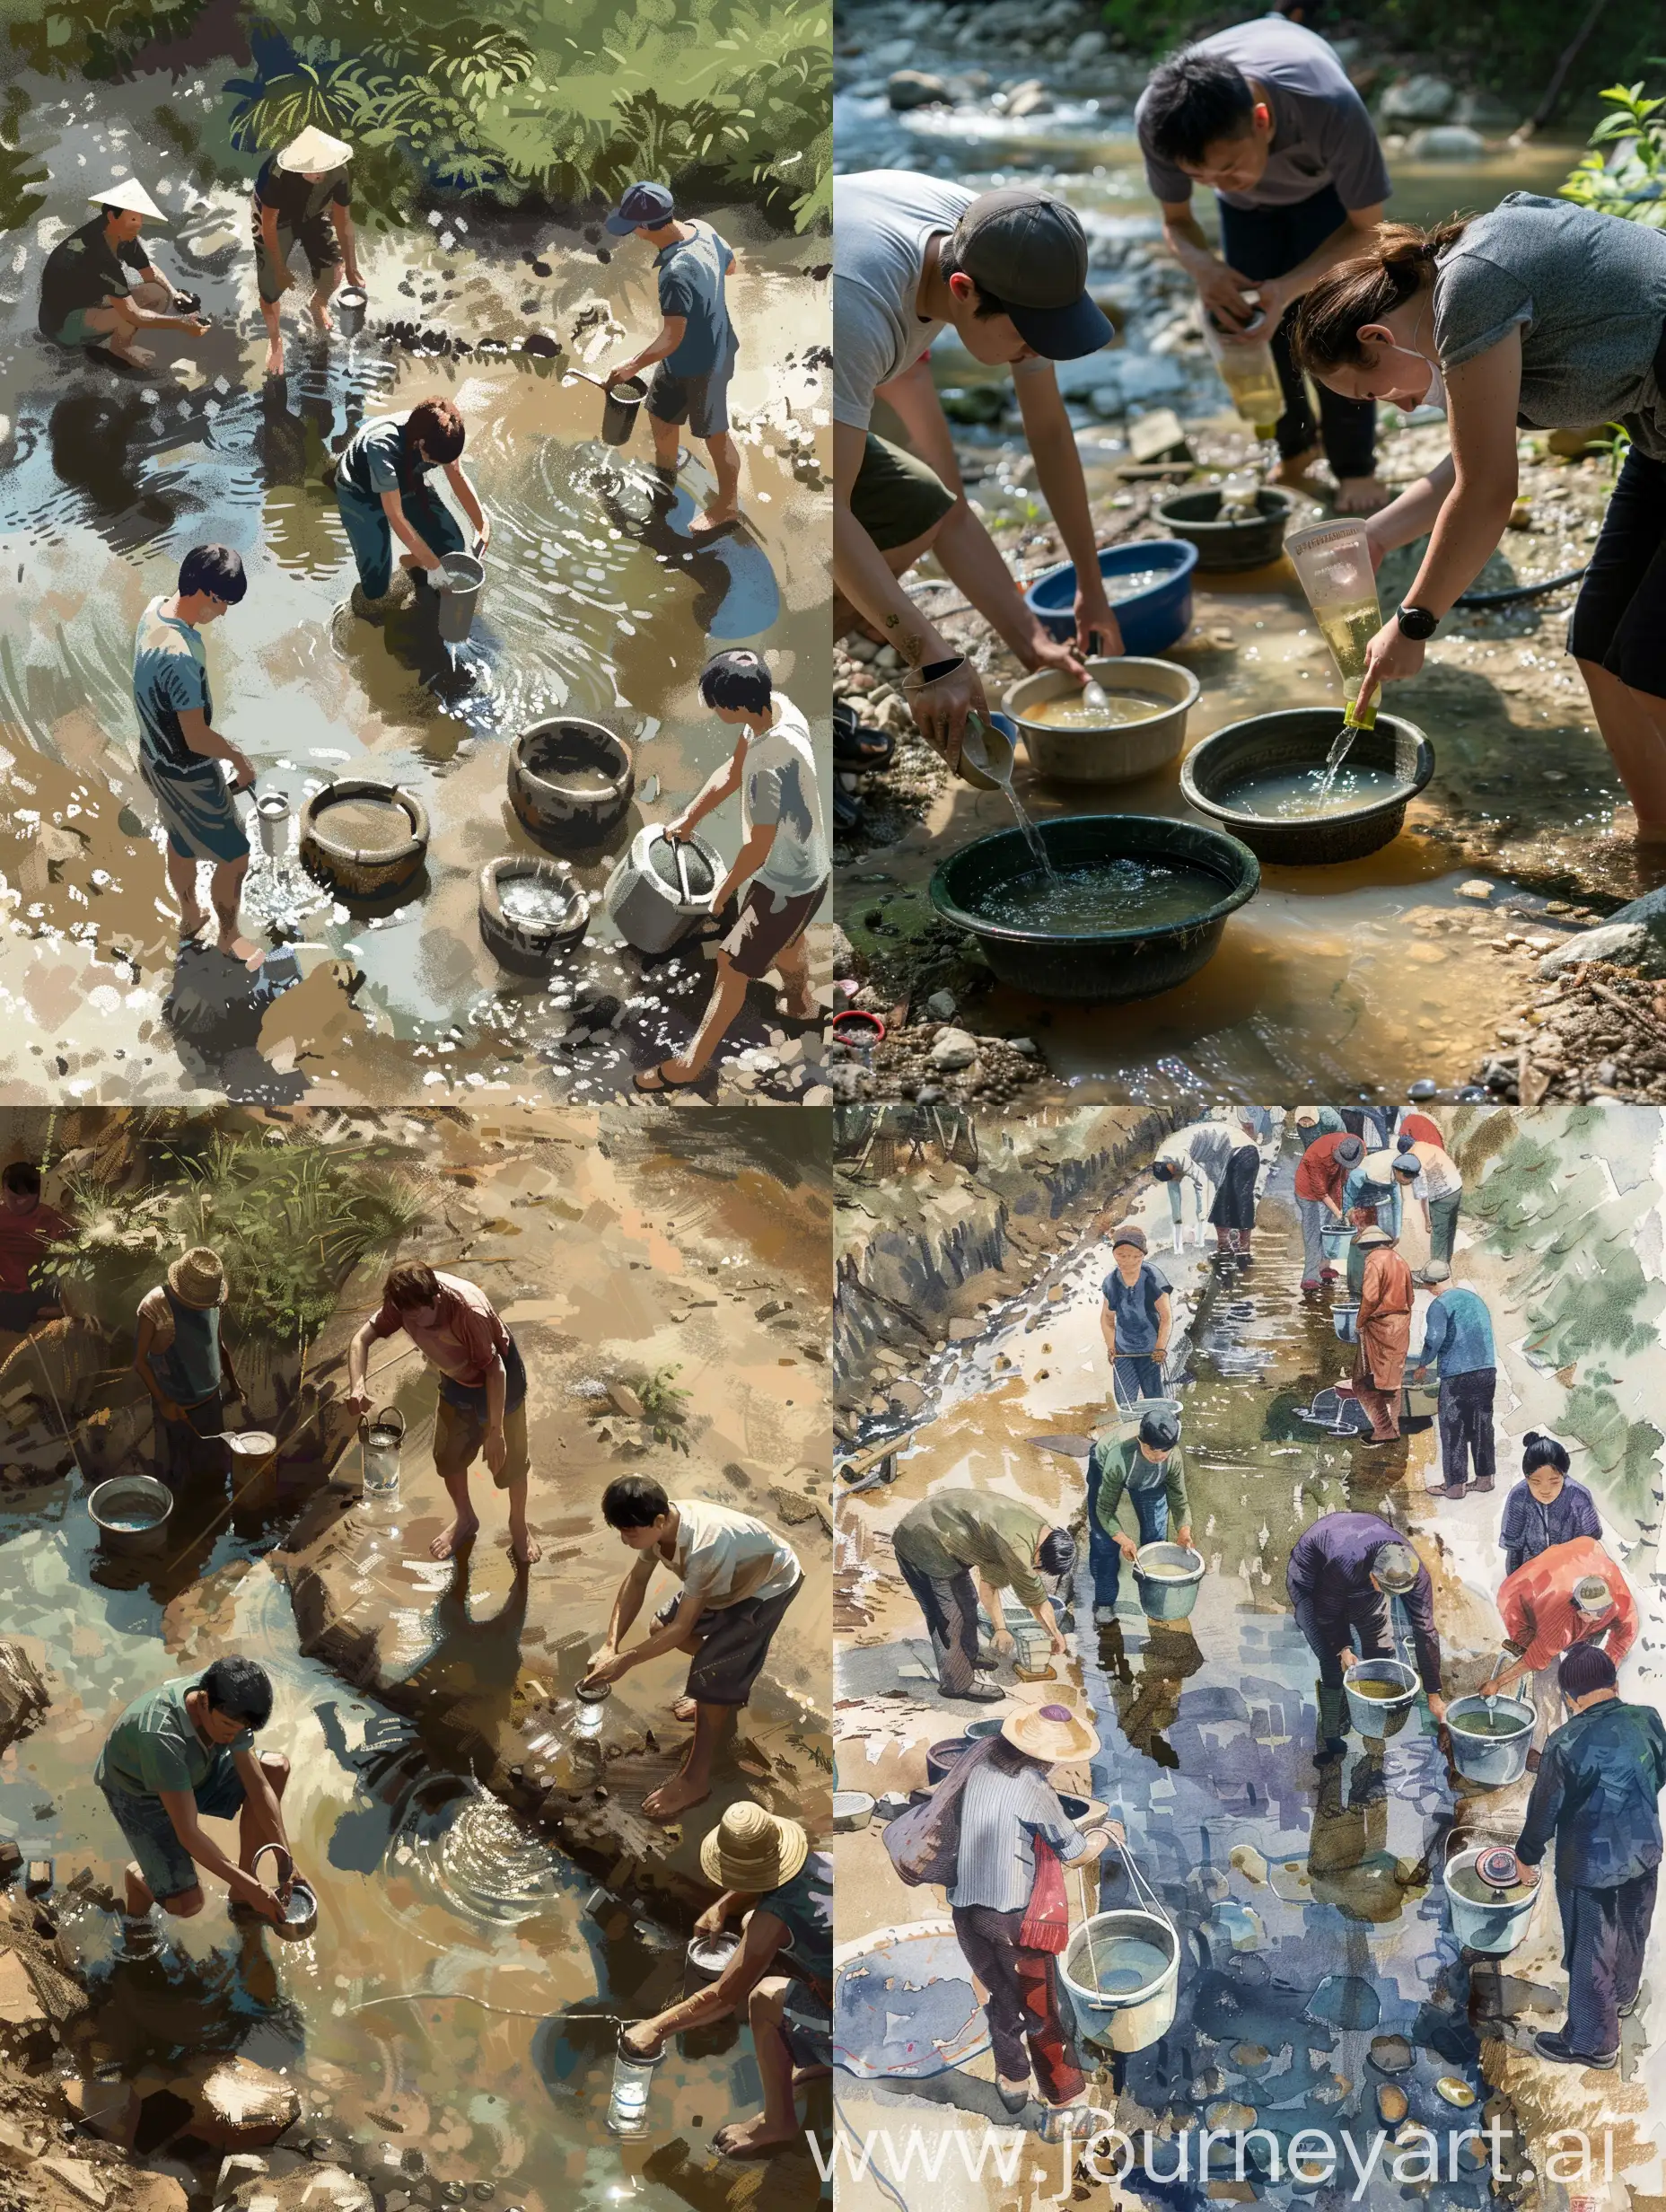 Realistic-Water-Filtration-Scene-with-People-and-Natural-Disaster-Affected-Environment